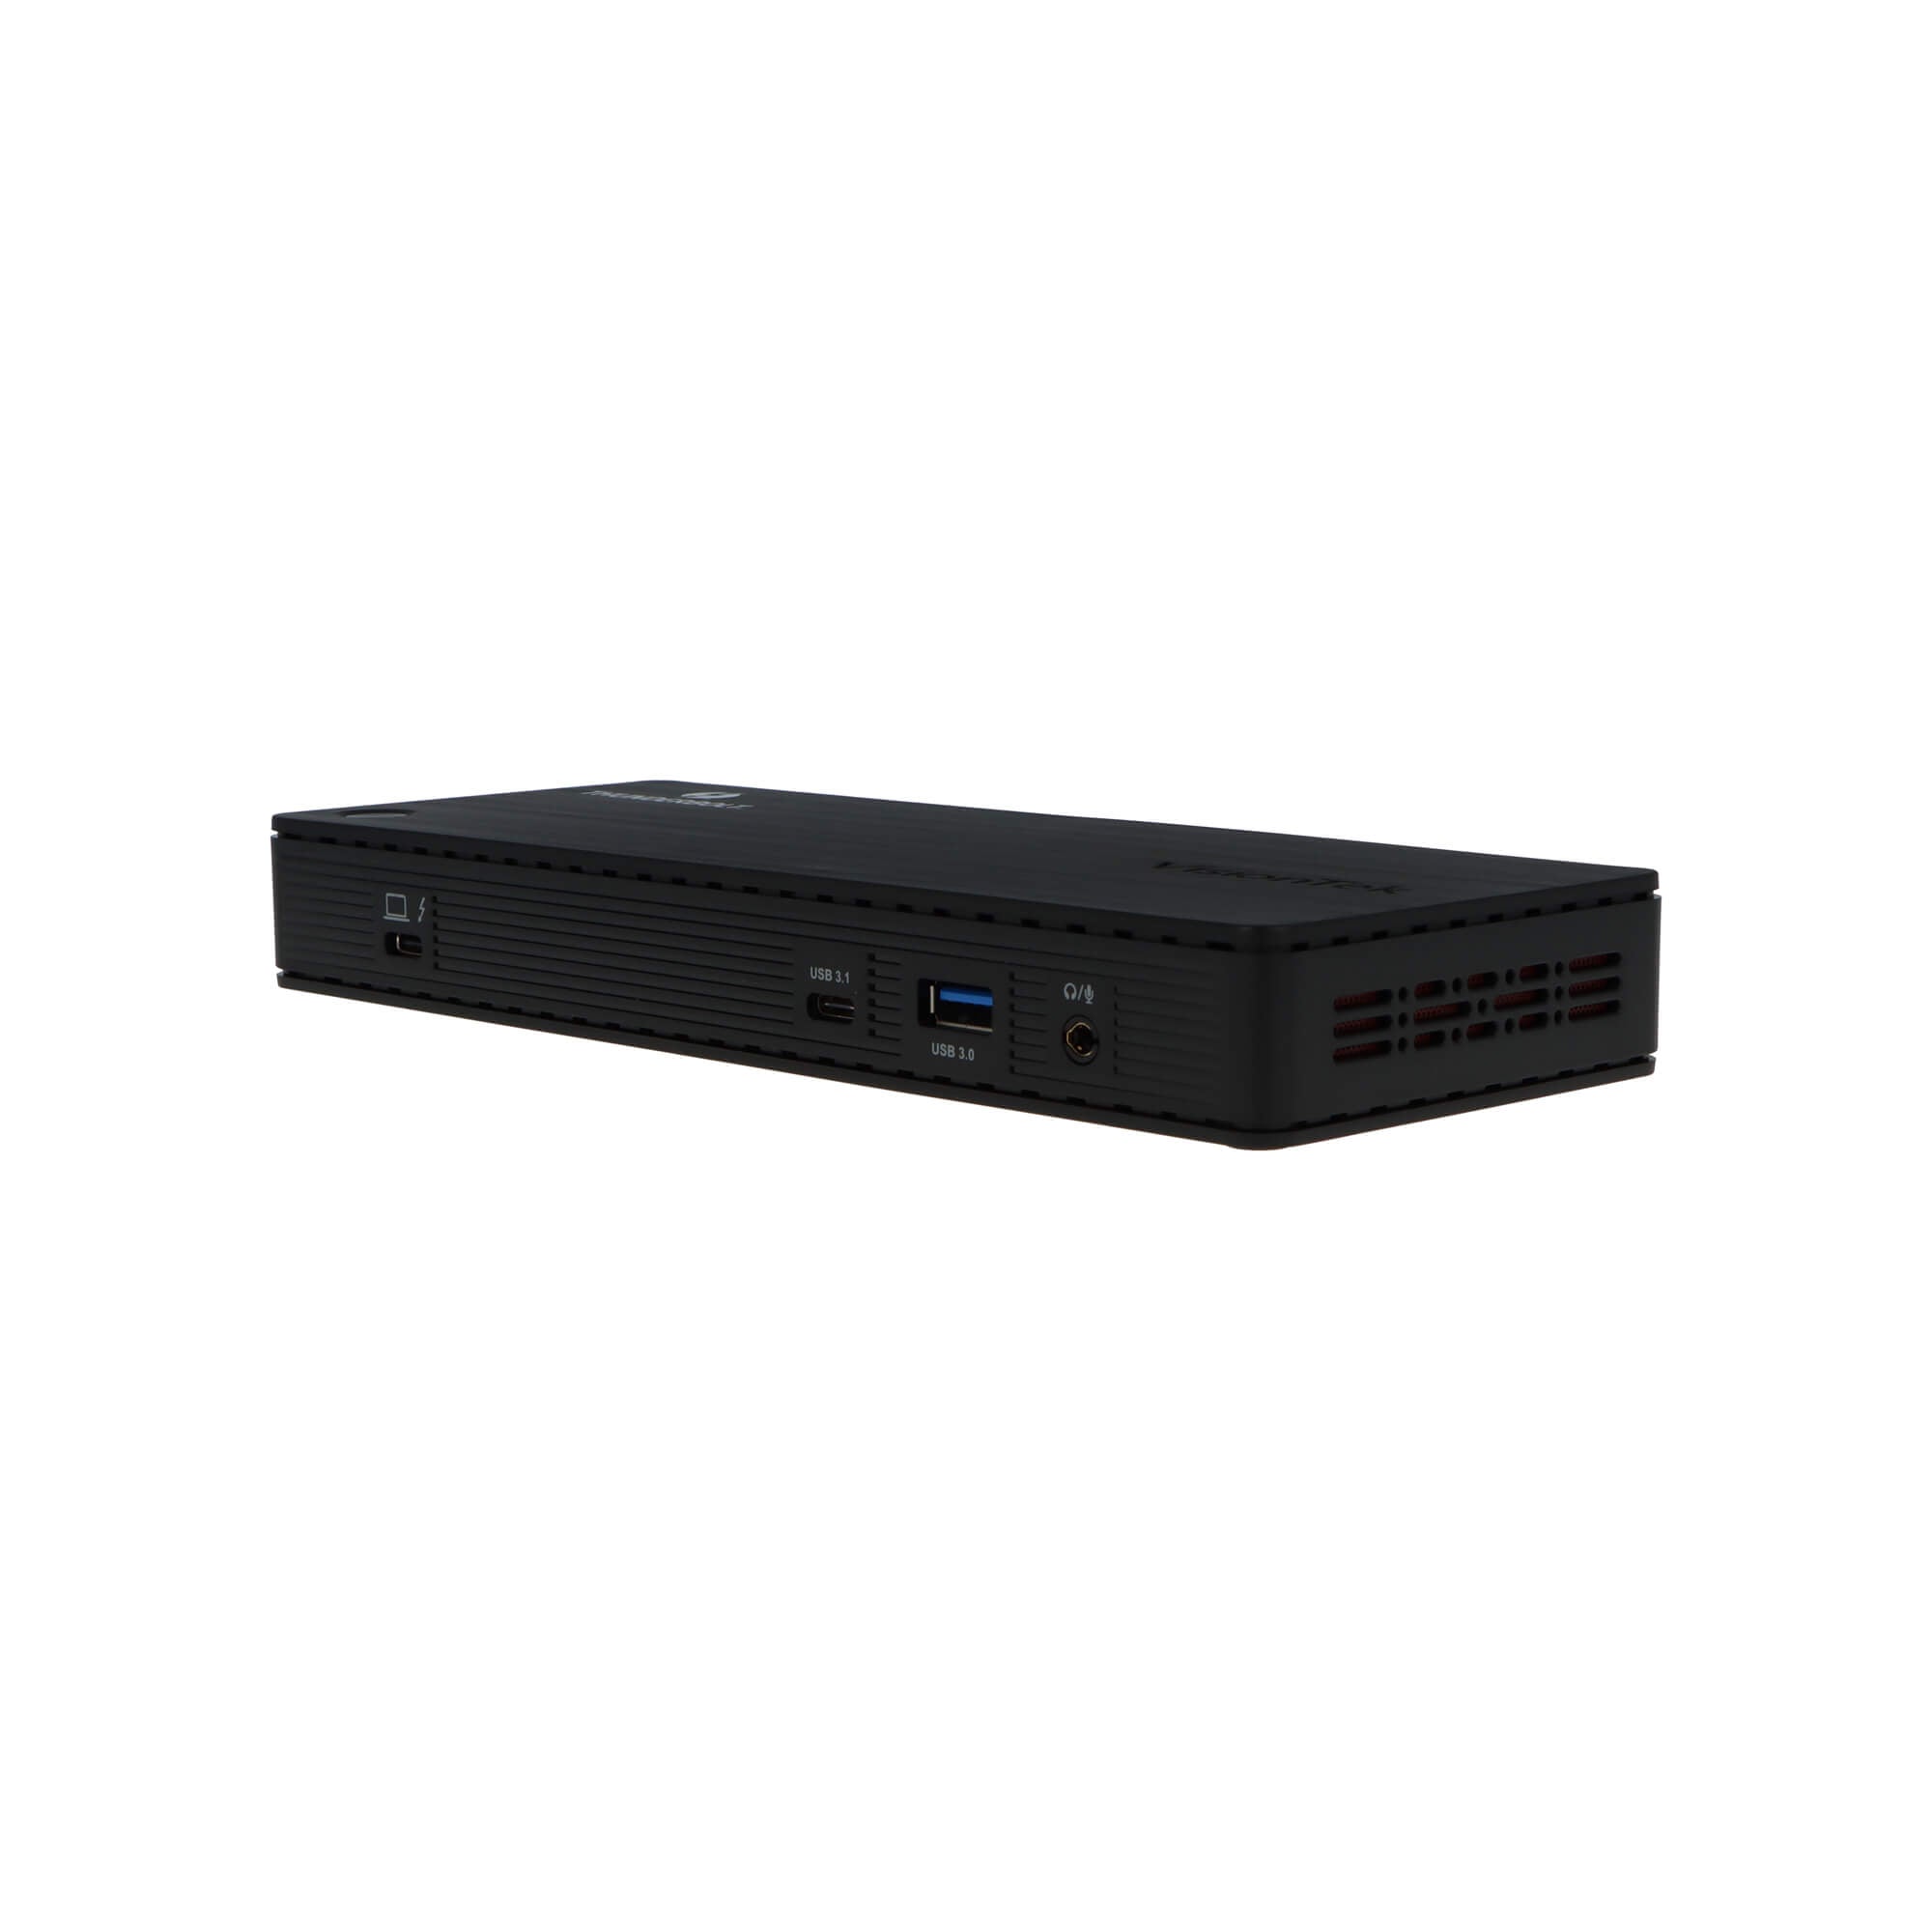 VT4800 Dual Display Thunderbolt 3 and USB-C Dock with Power Delivery